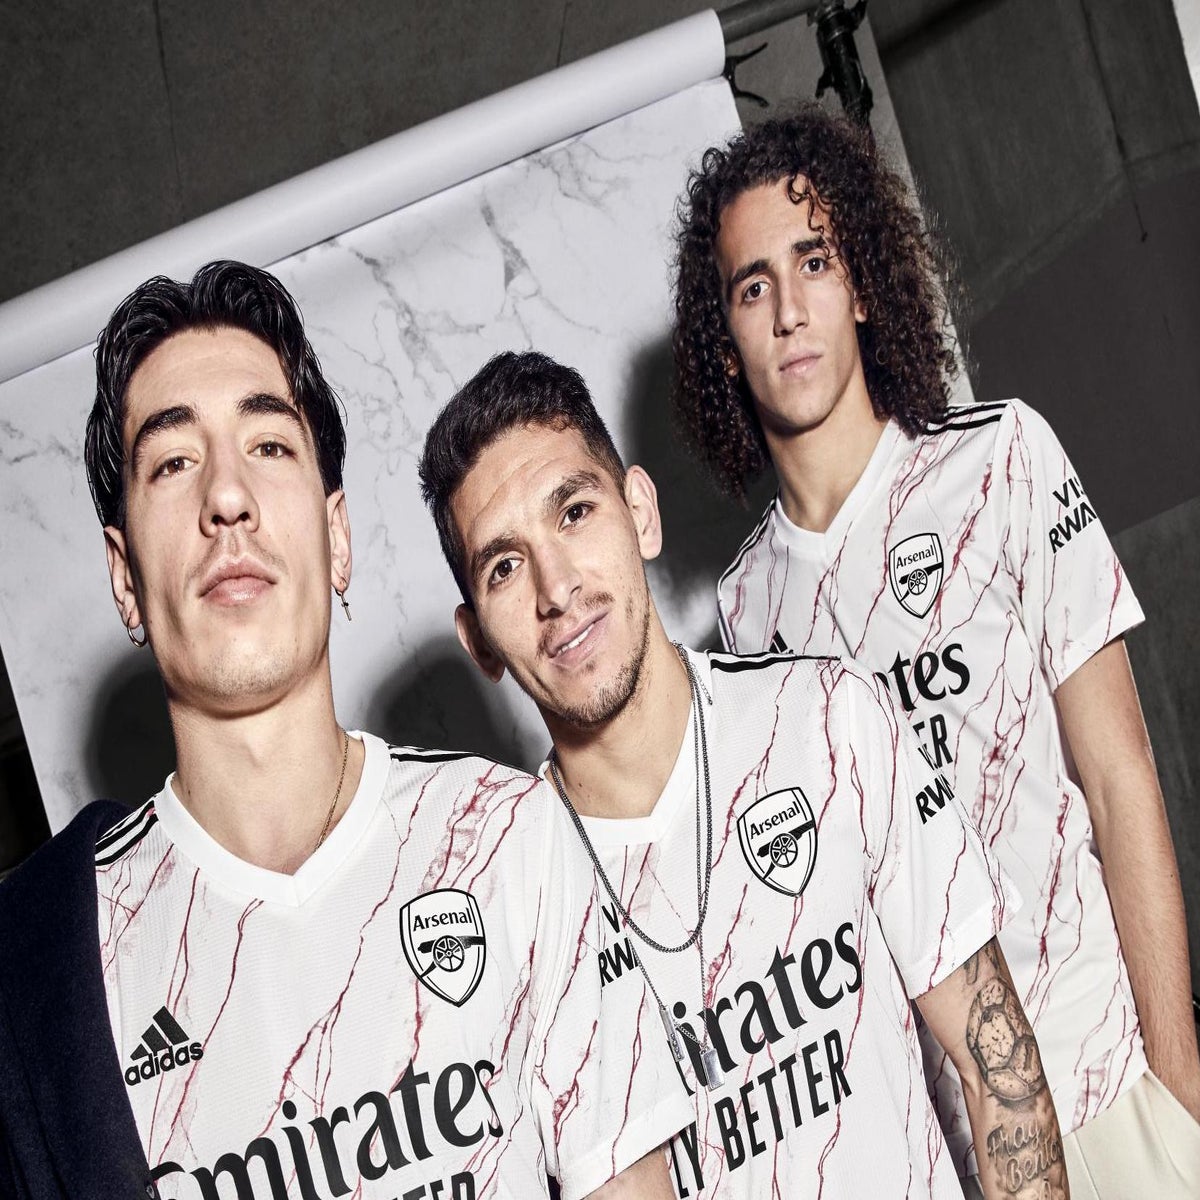 2020/21 adidas kit collection is complete. The third kit is revealed